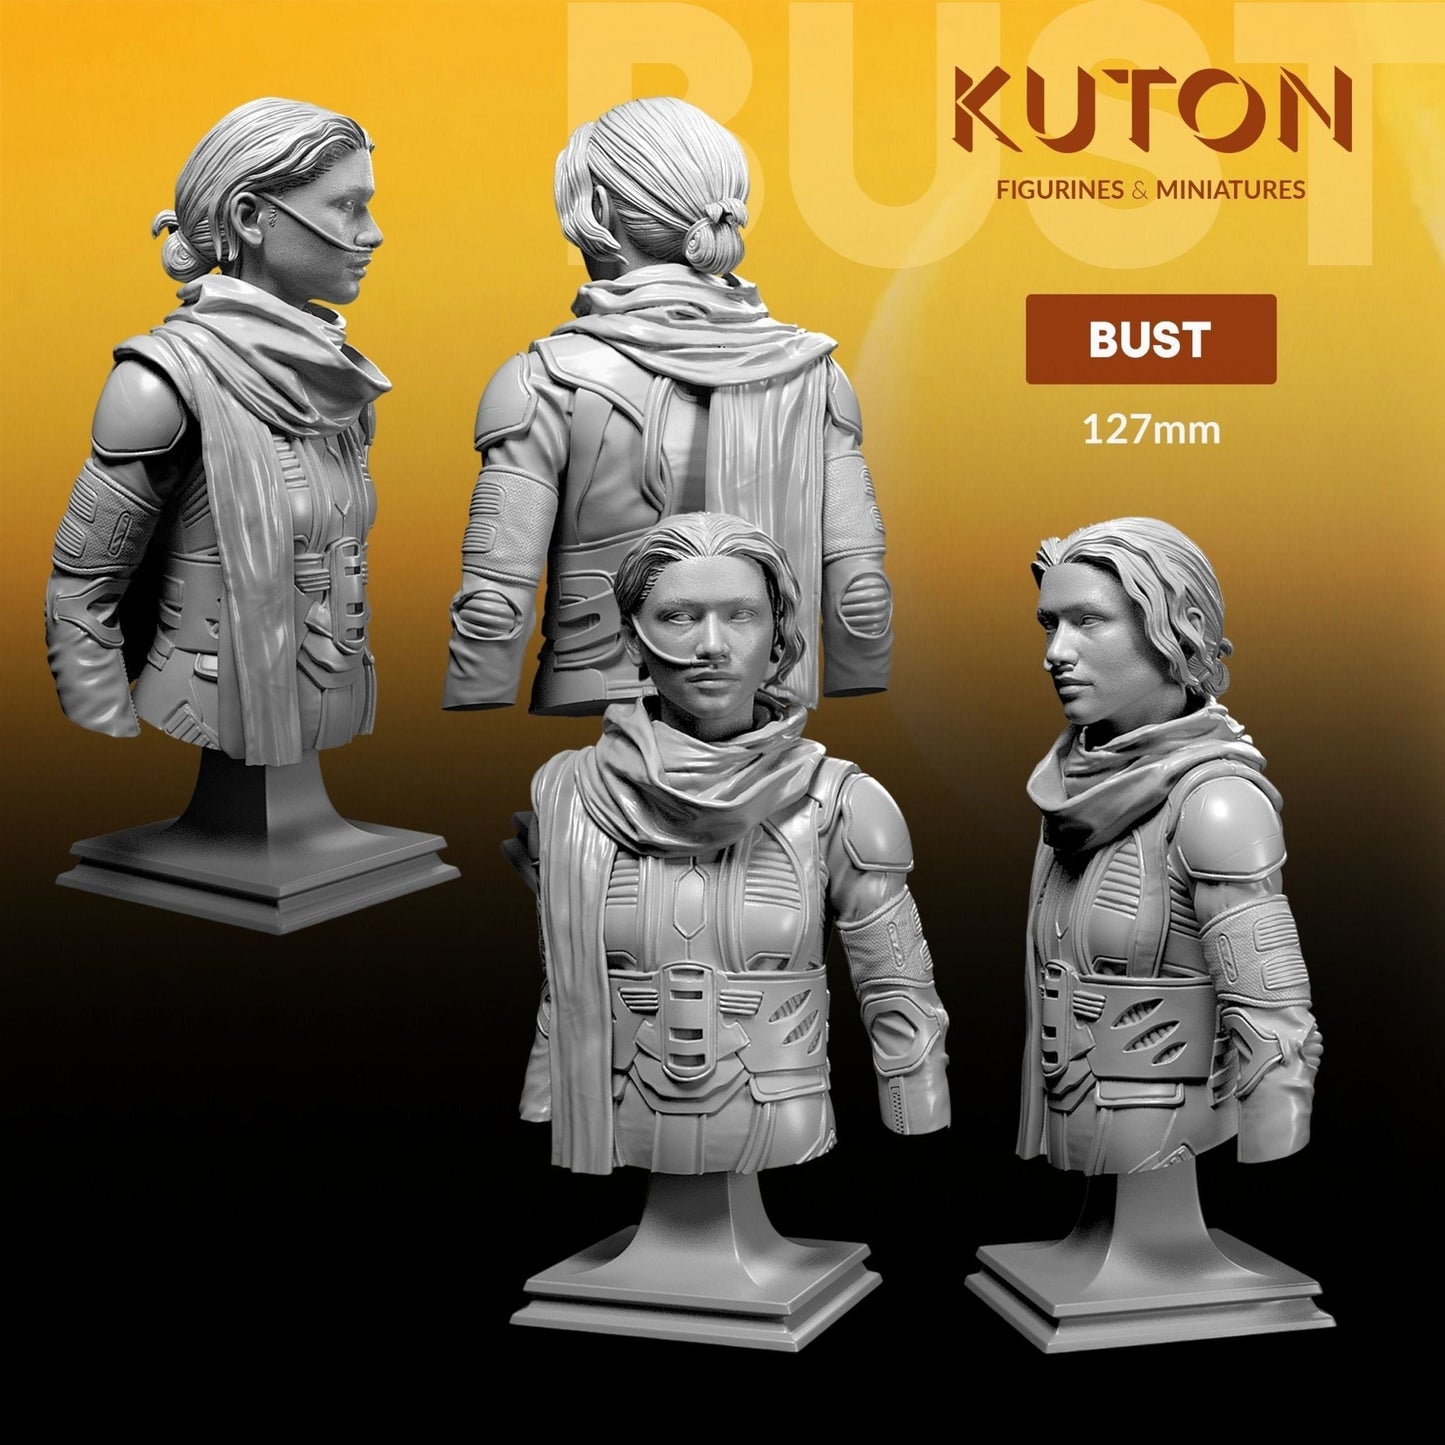 Chani Kynes BUST 3d printed Resin Figure Model Kit miniatures figurines collectibles and scale models UNPAINTED Fun Art by KUTON FIGURINES